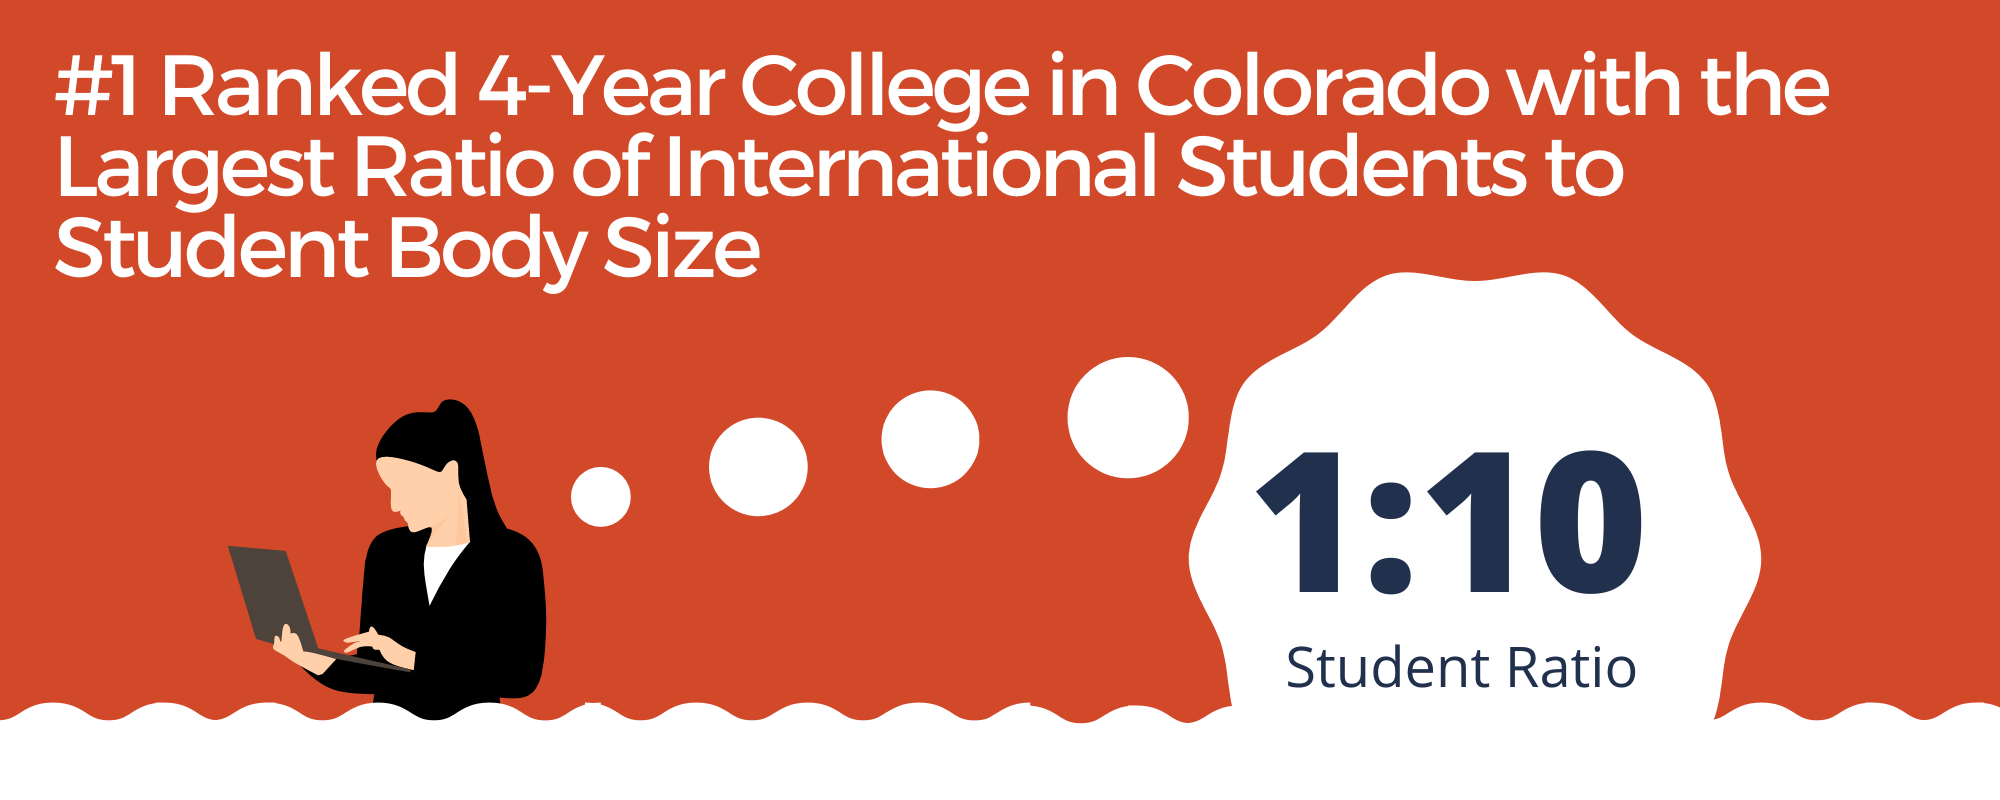 #1 Ranked 4-Year College in Colorado with the Largest Ratio of International Students to Student Body Size